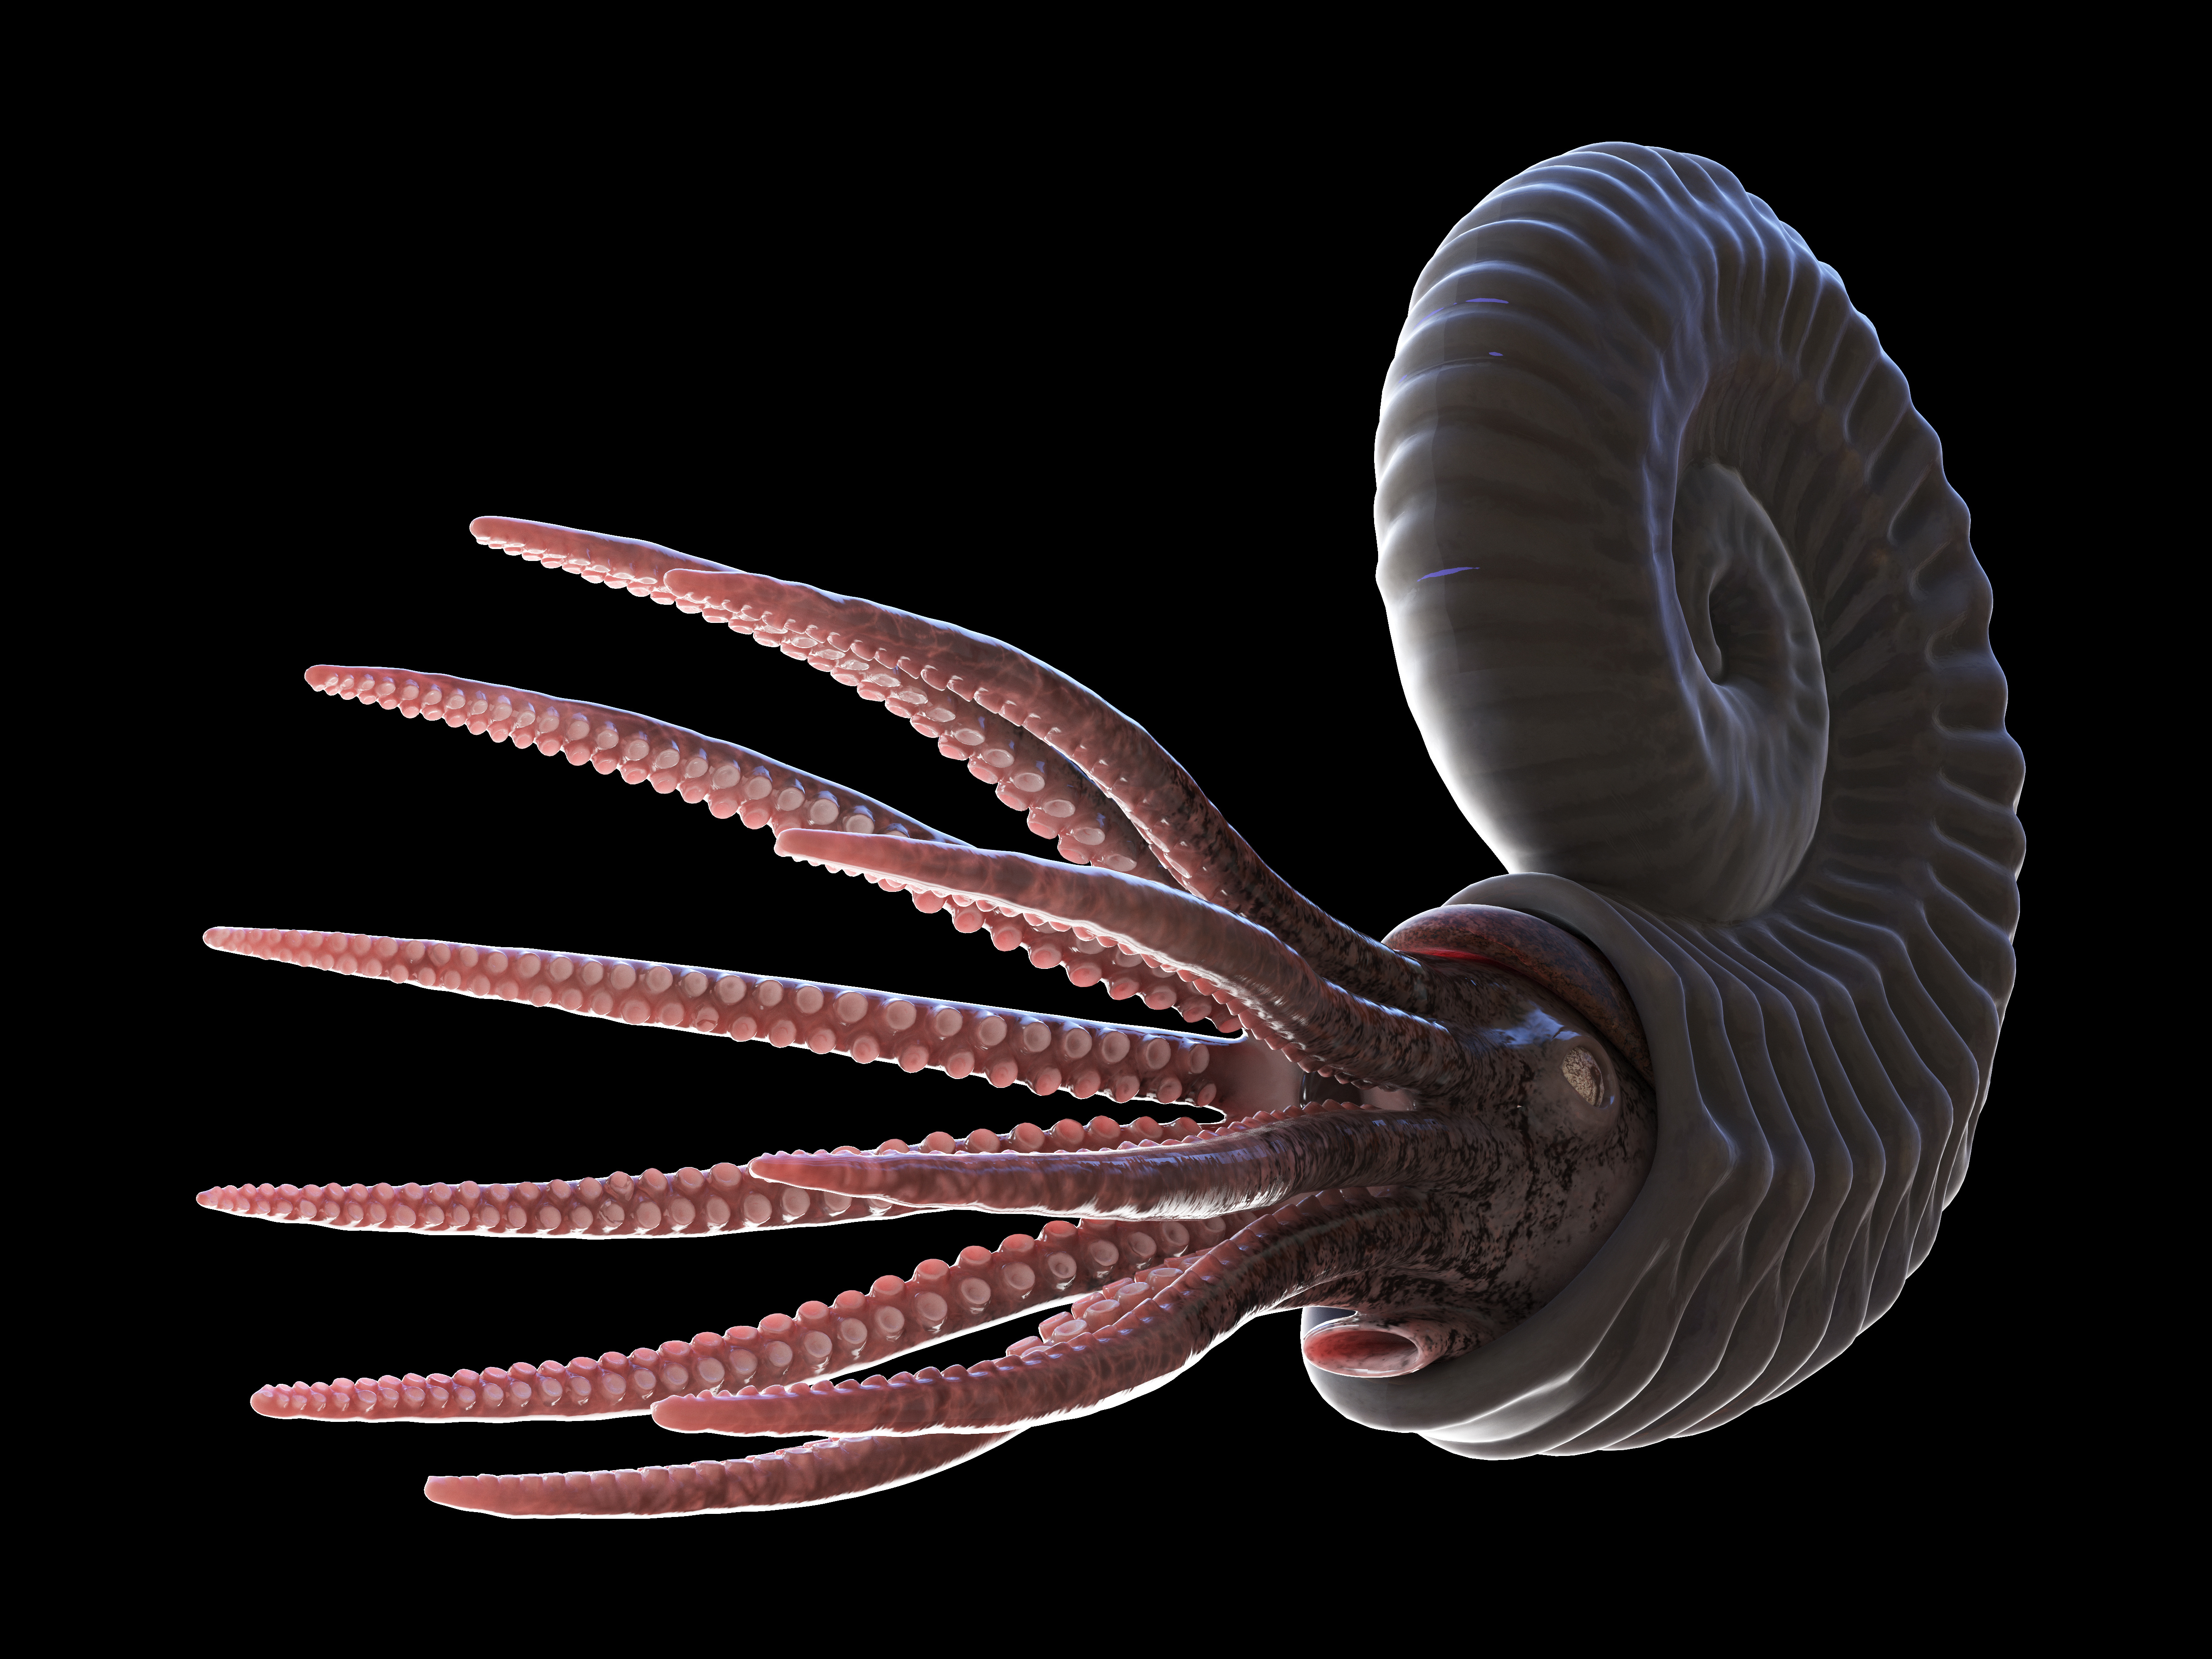 Ammonite image - 3D rendered. Image shows a spiral shell and squid like body